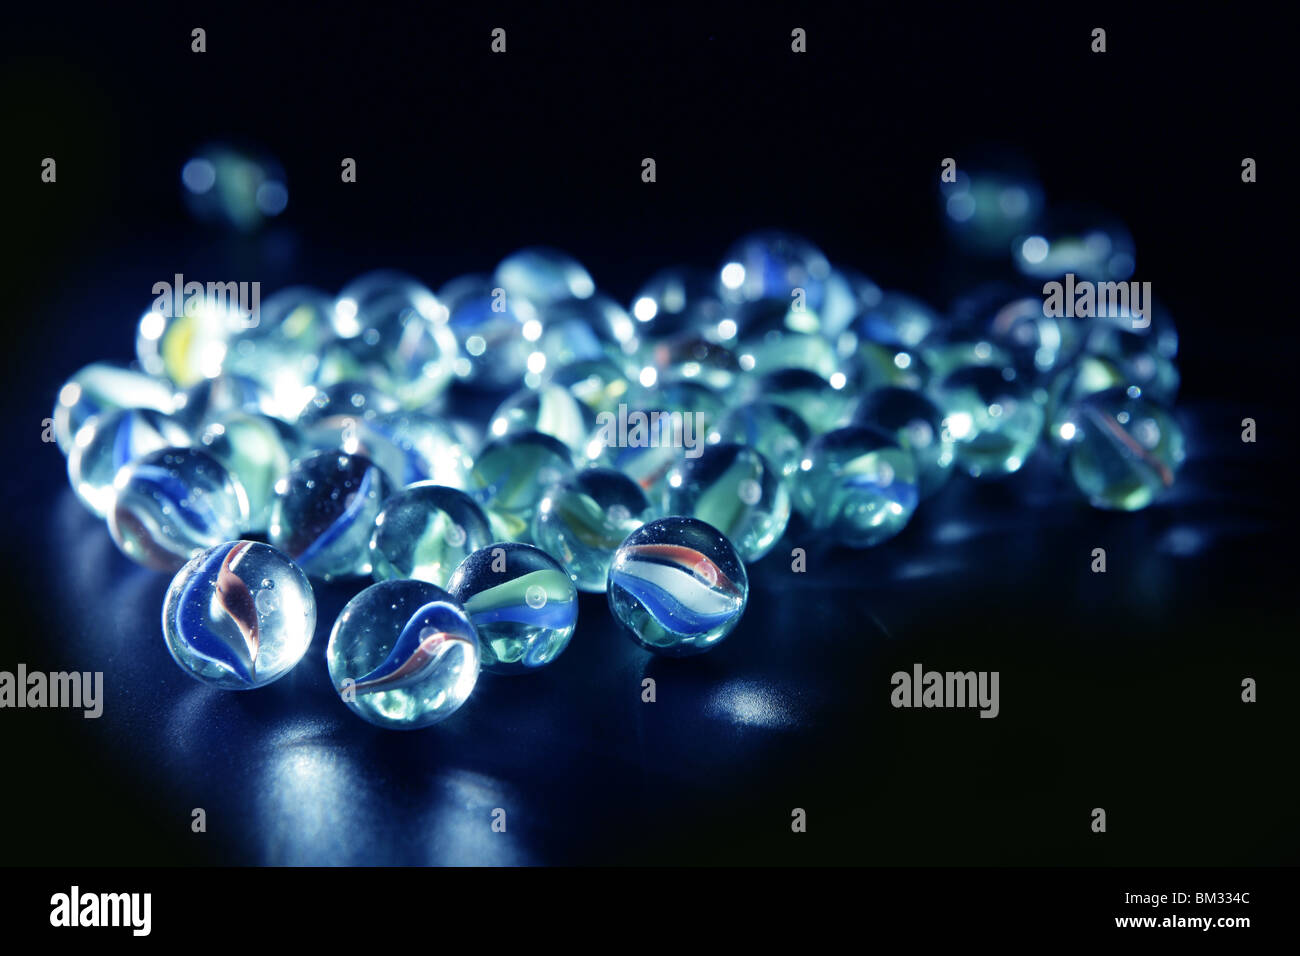 glass marbles with blue reflections over black background Stock Photo